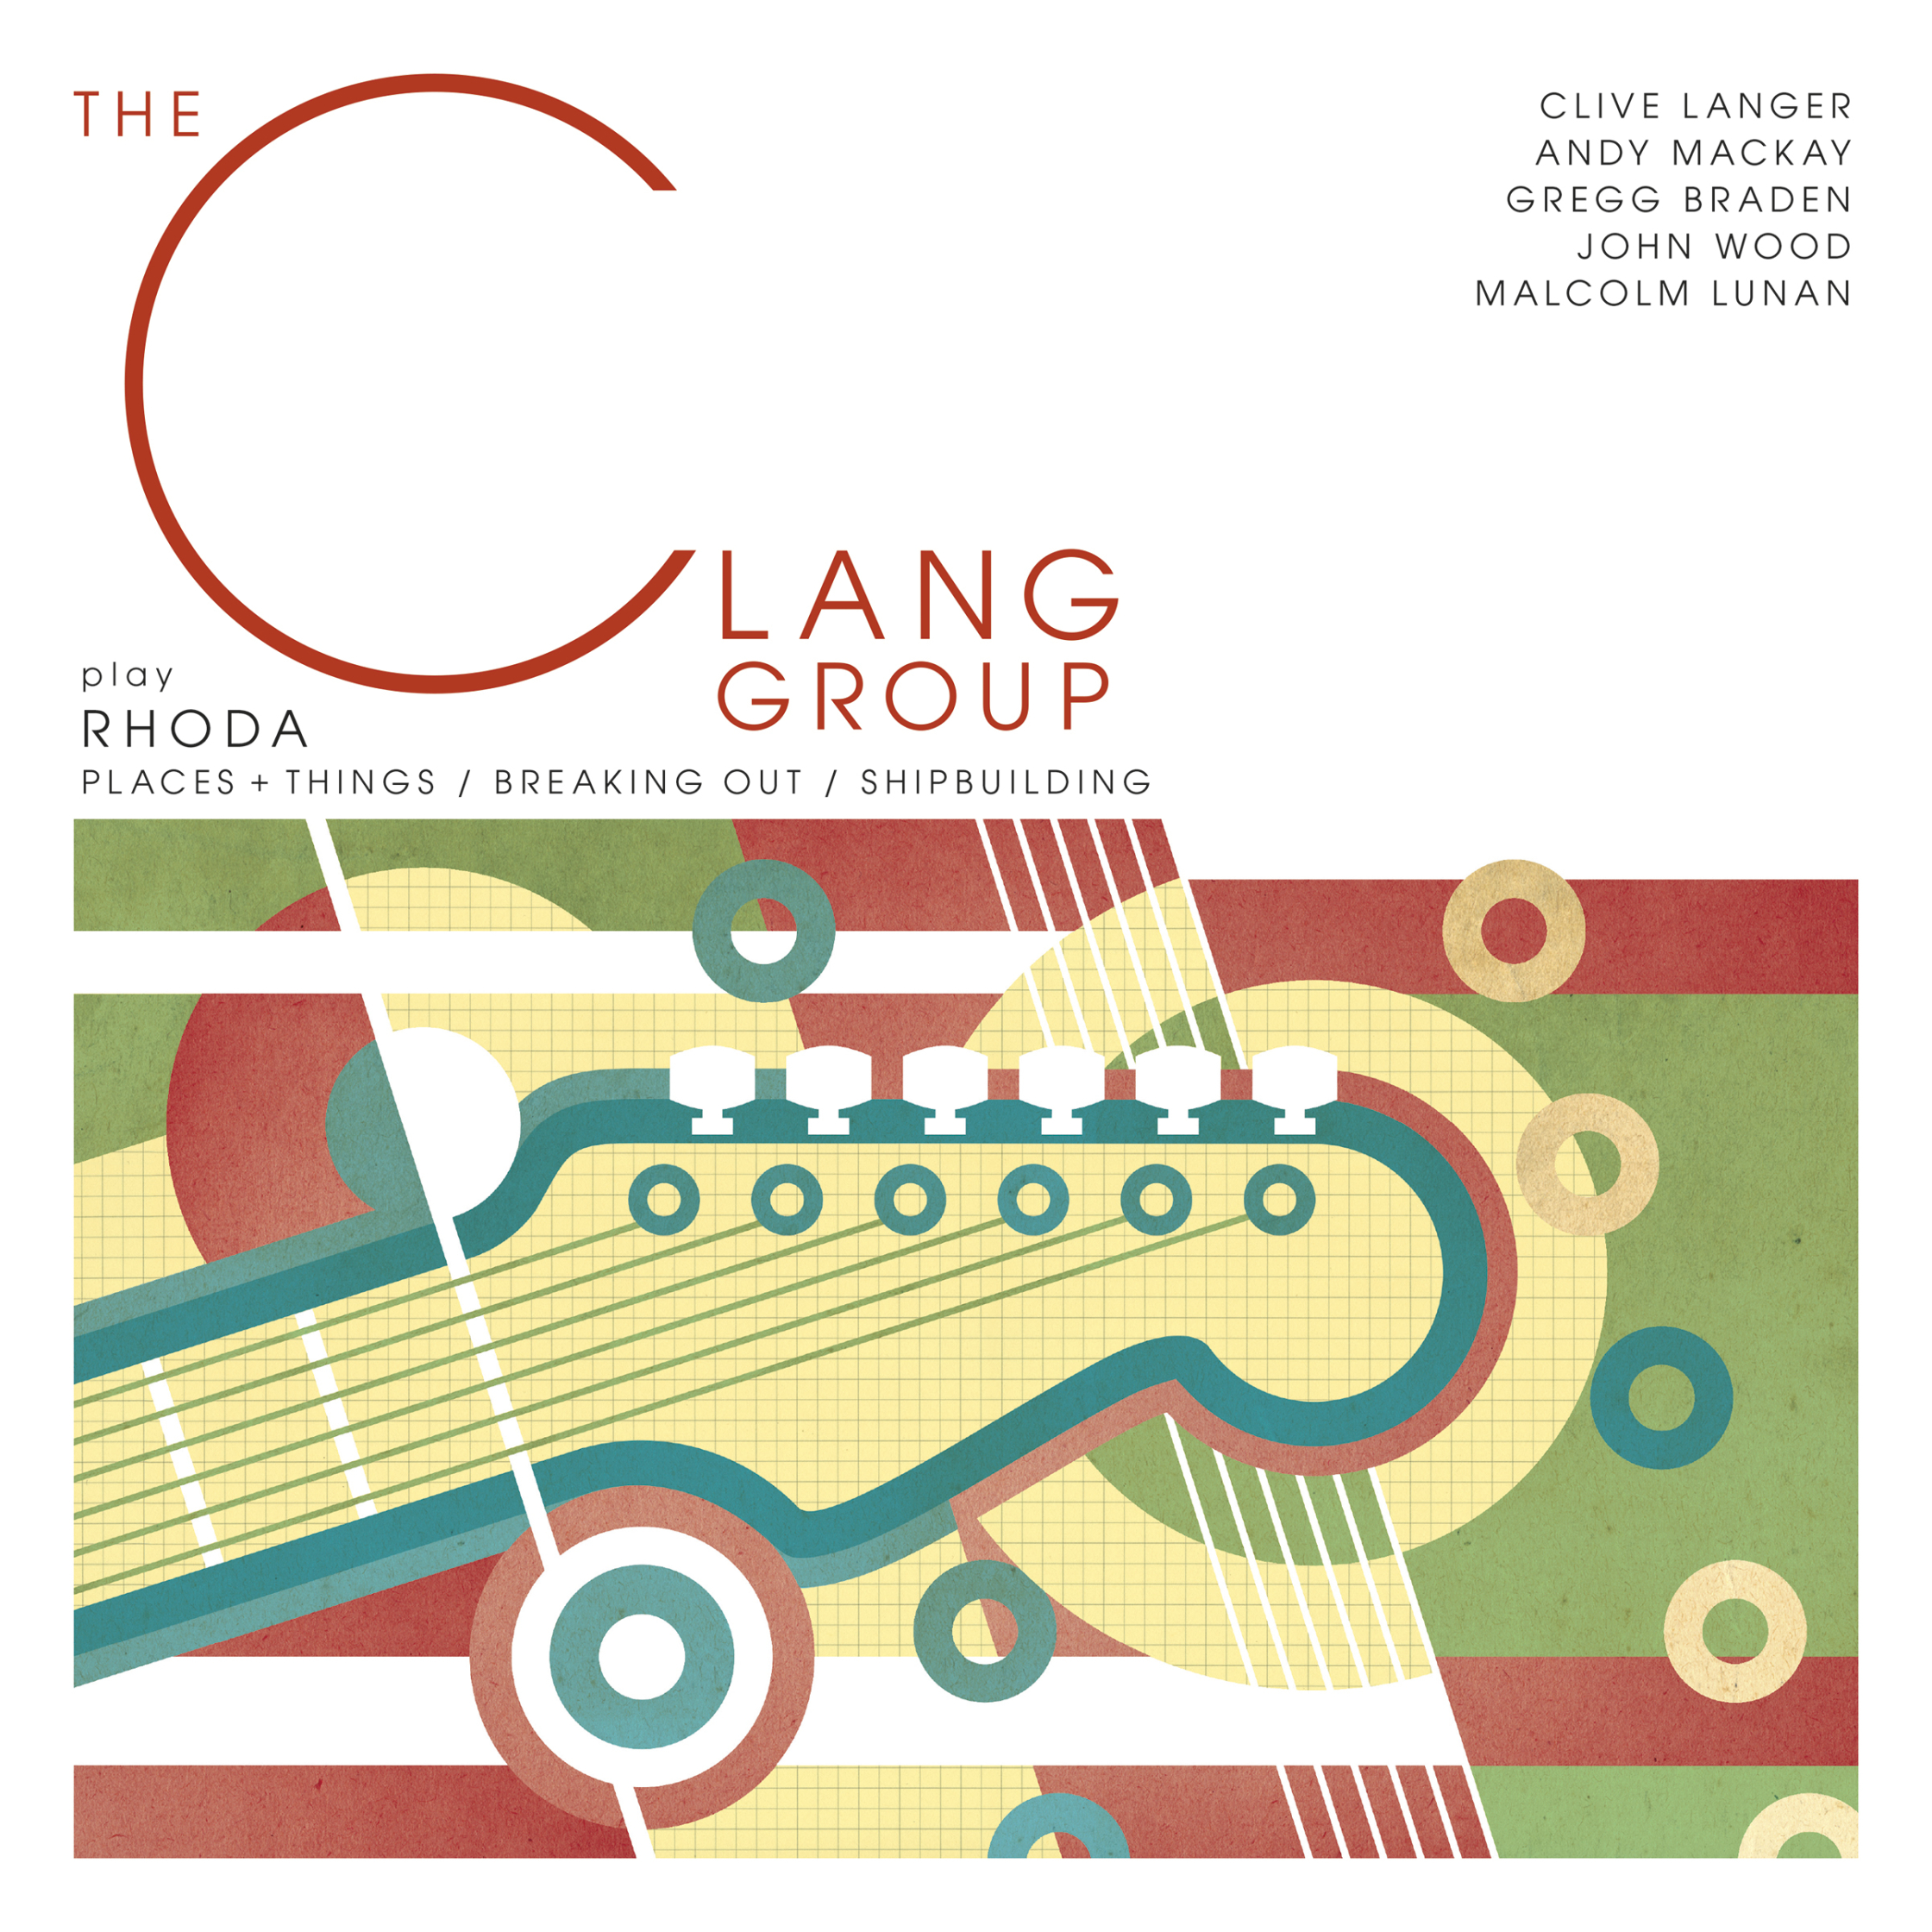 The Clang Group